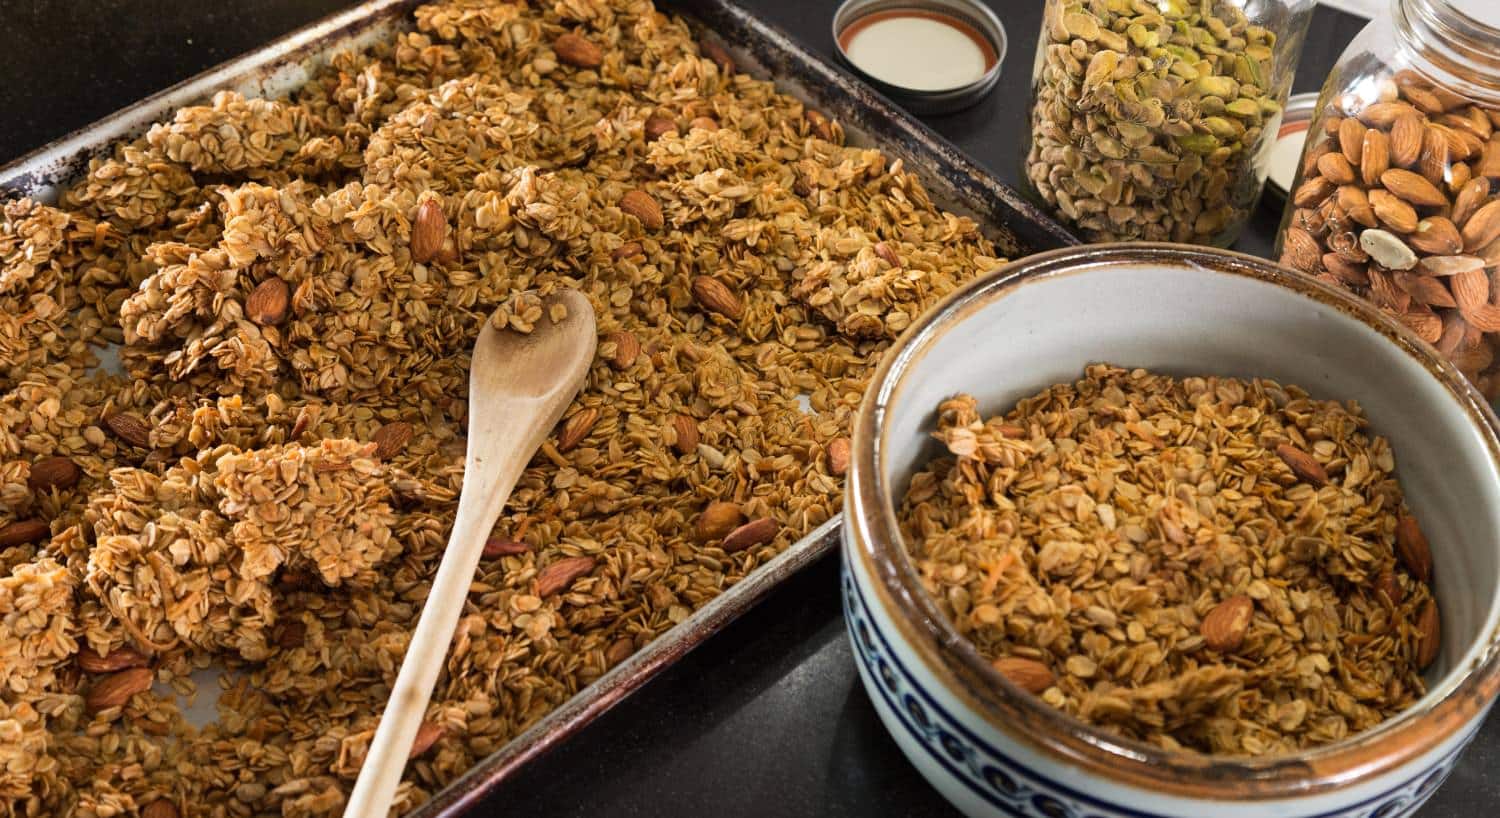 Close up view of homemade granola in baking tray and bowl